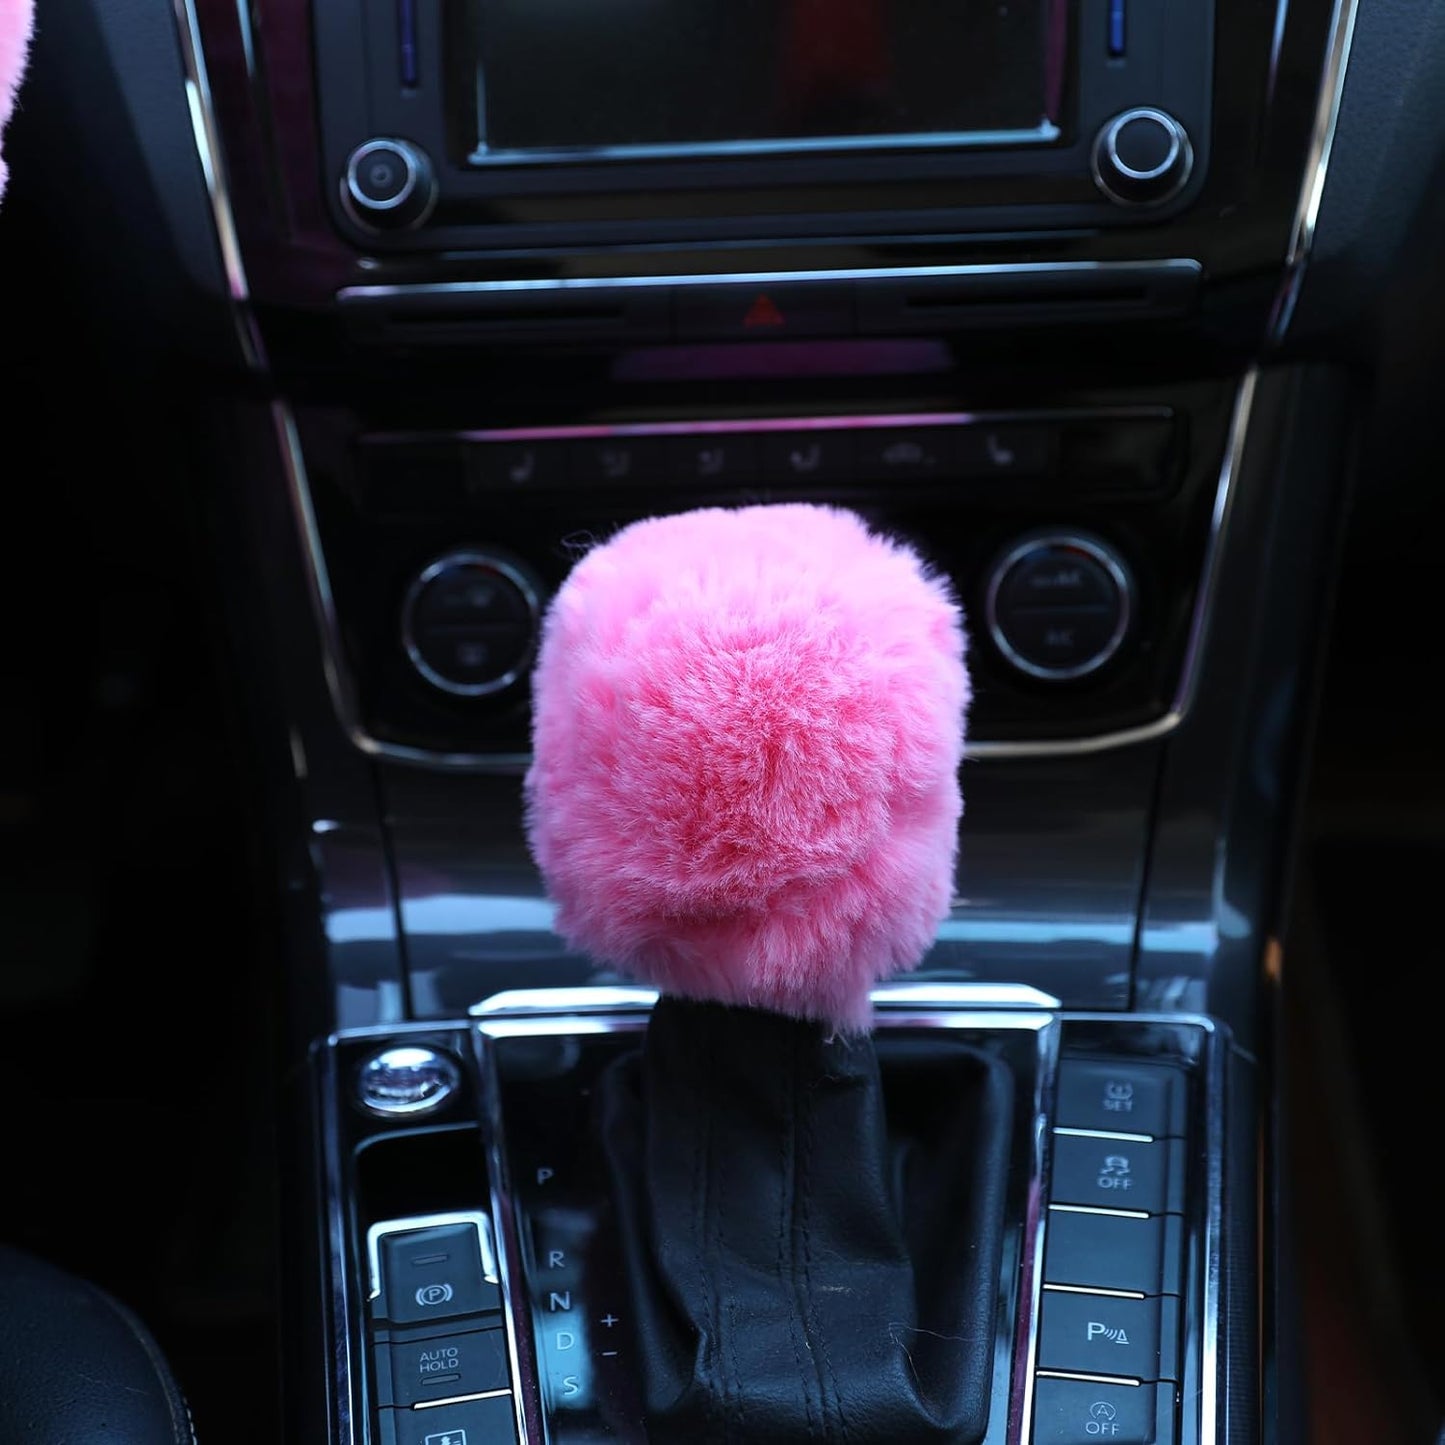 Pink Steering Wheel Cover Set, 3Pcs Steering Wheel Cover for Women Girls, Car Steering Wheel Cover Wheel Protector, Furry Steering Wheel Cover, Non-Slip Car Decoration Pink Car Accessories